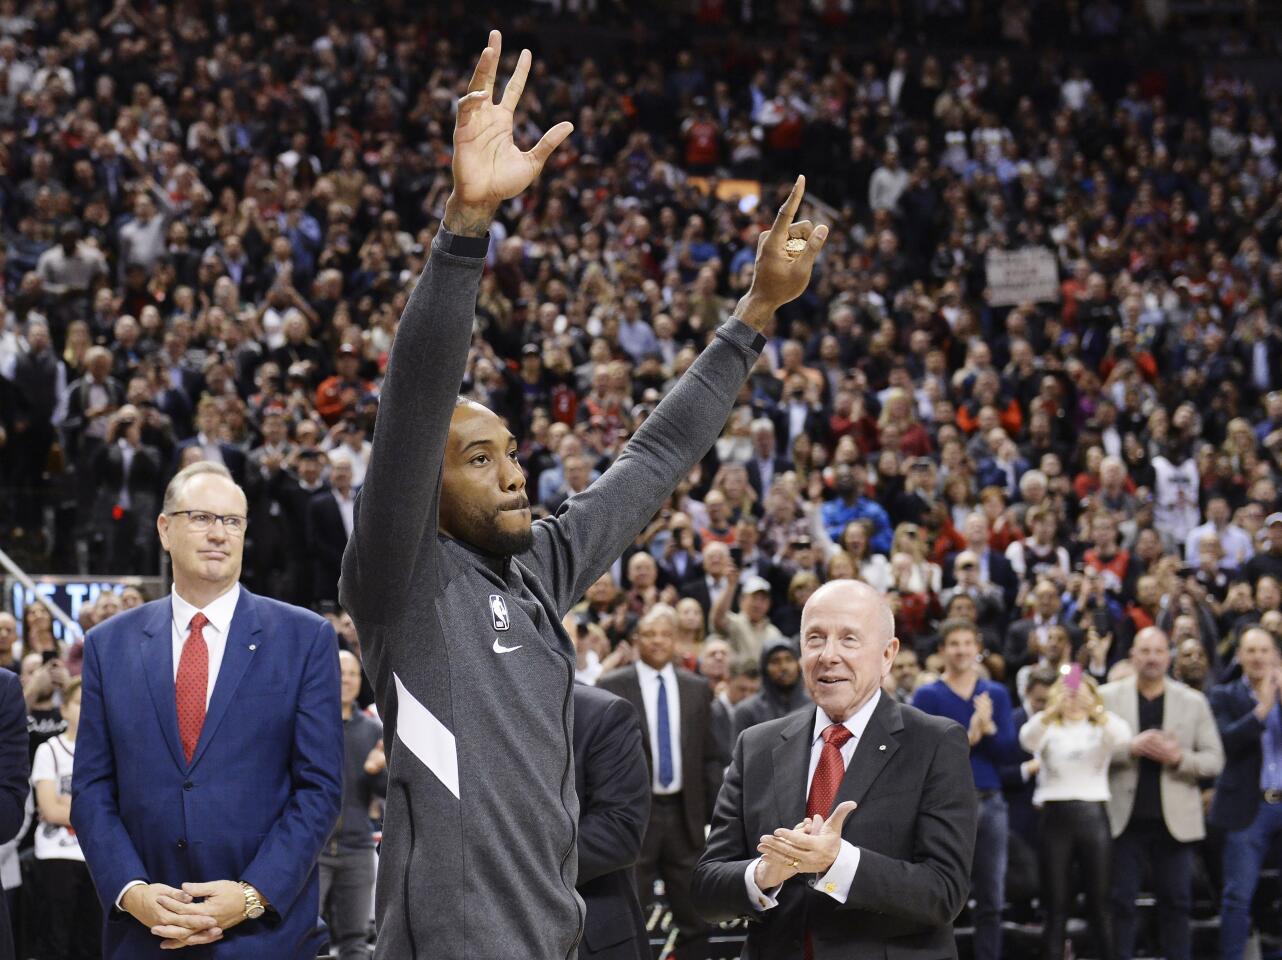 Former Toronto Raptors and now Los Angeles Clippers forward Kawhi Leonard salutes the crowd as he receives his 2019 NBA championship ring prior to an NBA basketball game, Wednesday, Dec. 11, 2019, in Toronto. (Nathan Denette/The Canadian Press via AP)